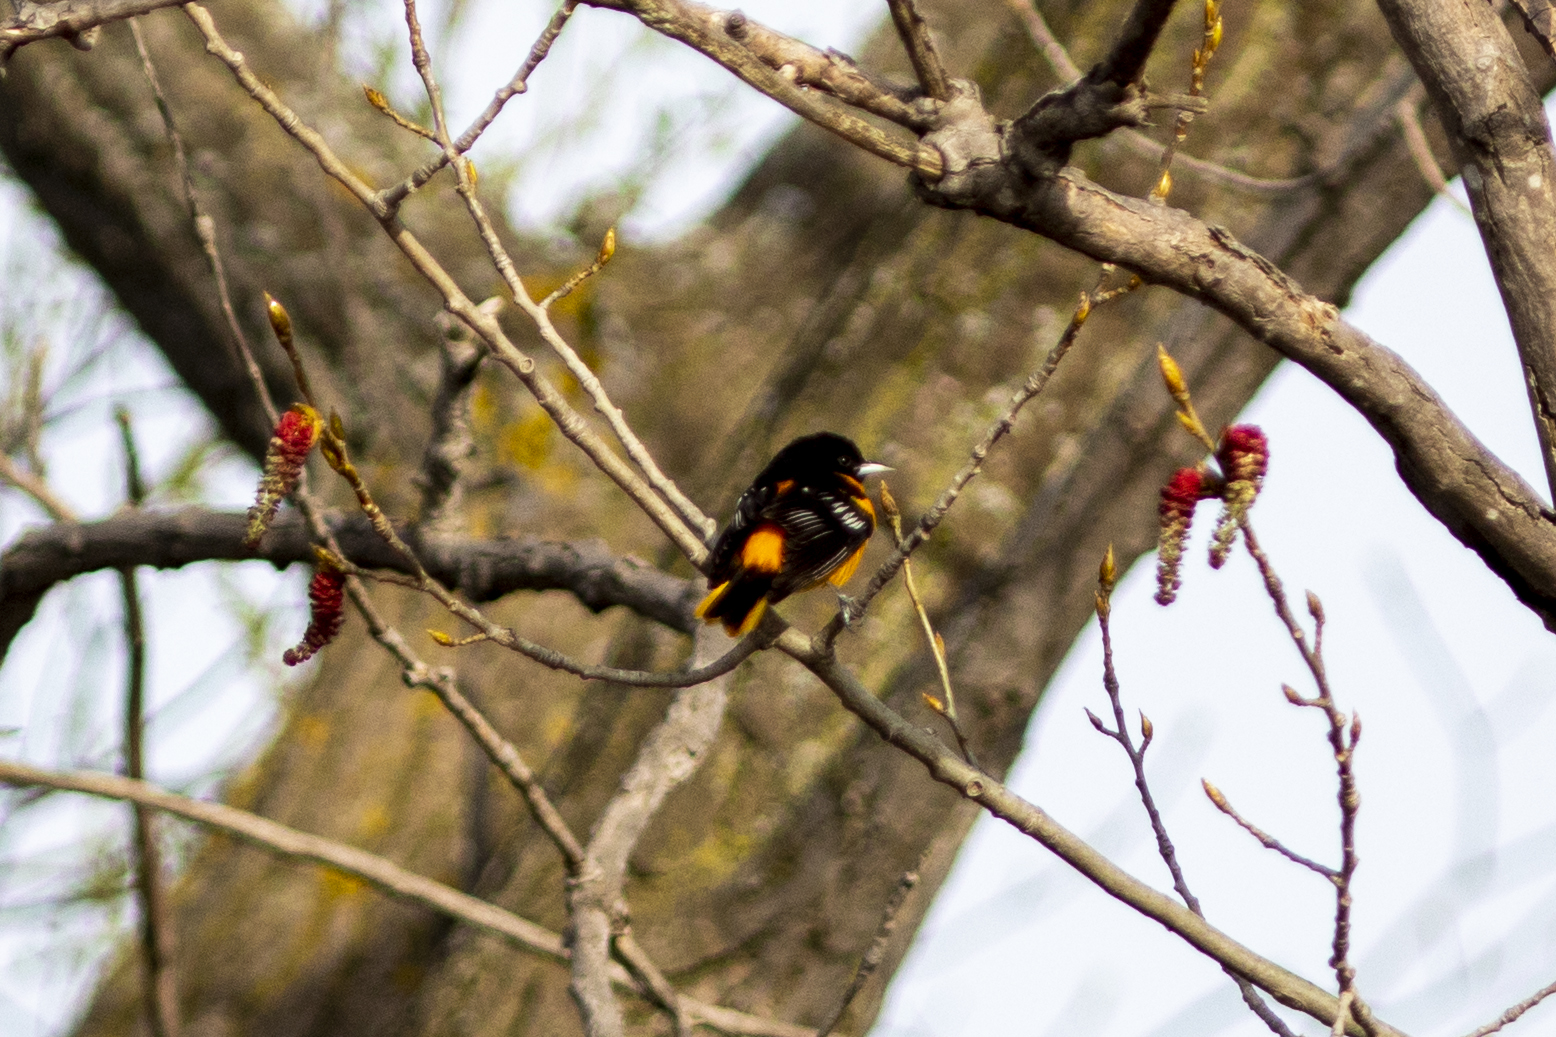 An orange and black bird with its back turned and head to the side sits on a branch.